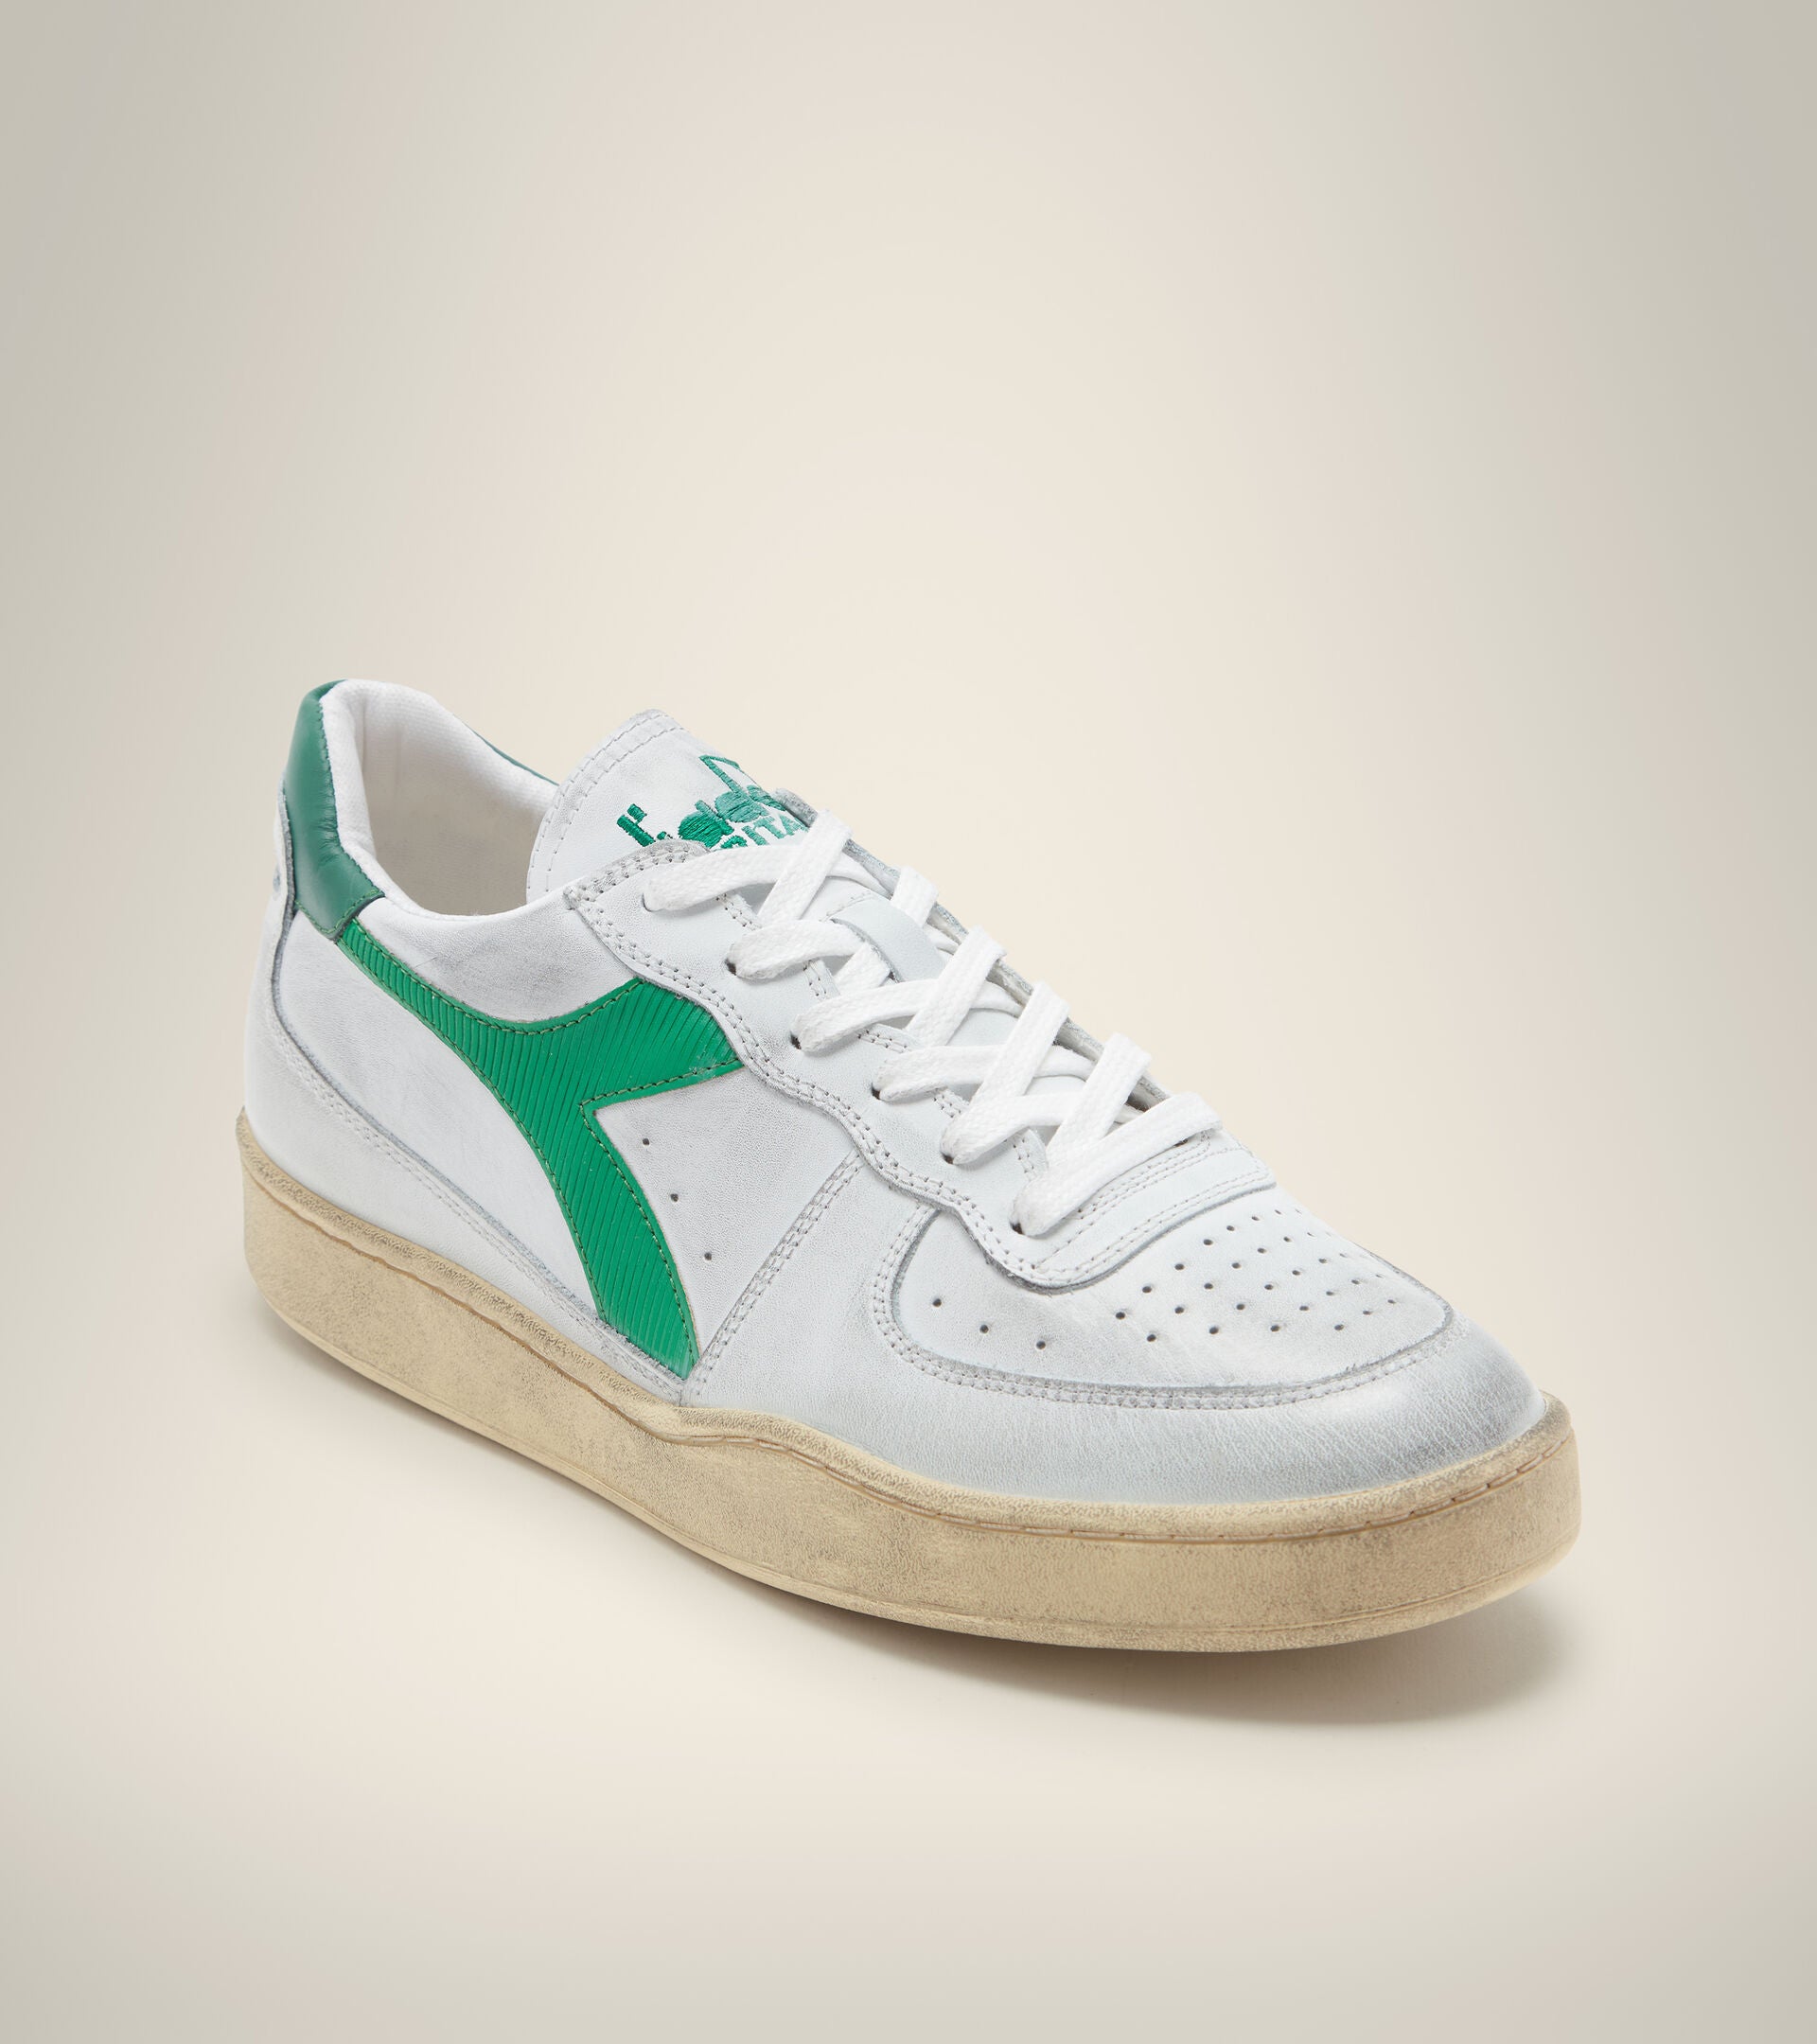 angled view of white diadora men's mi basket low used shoe with a light green stripe